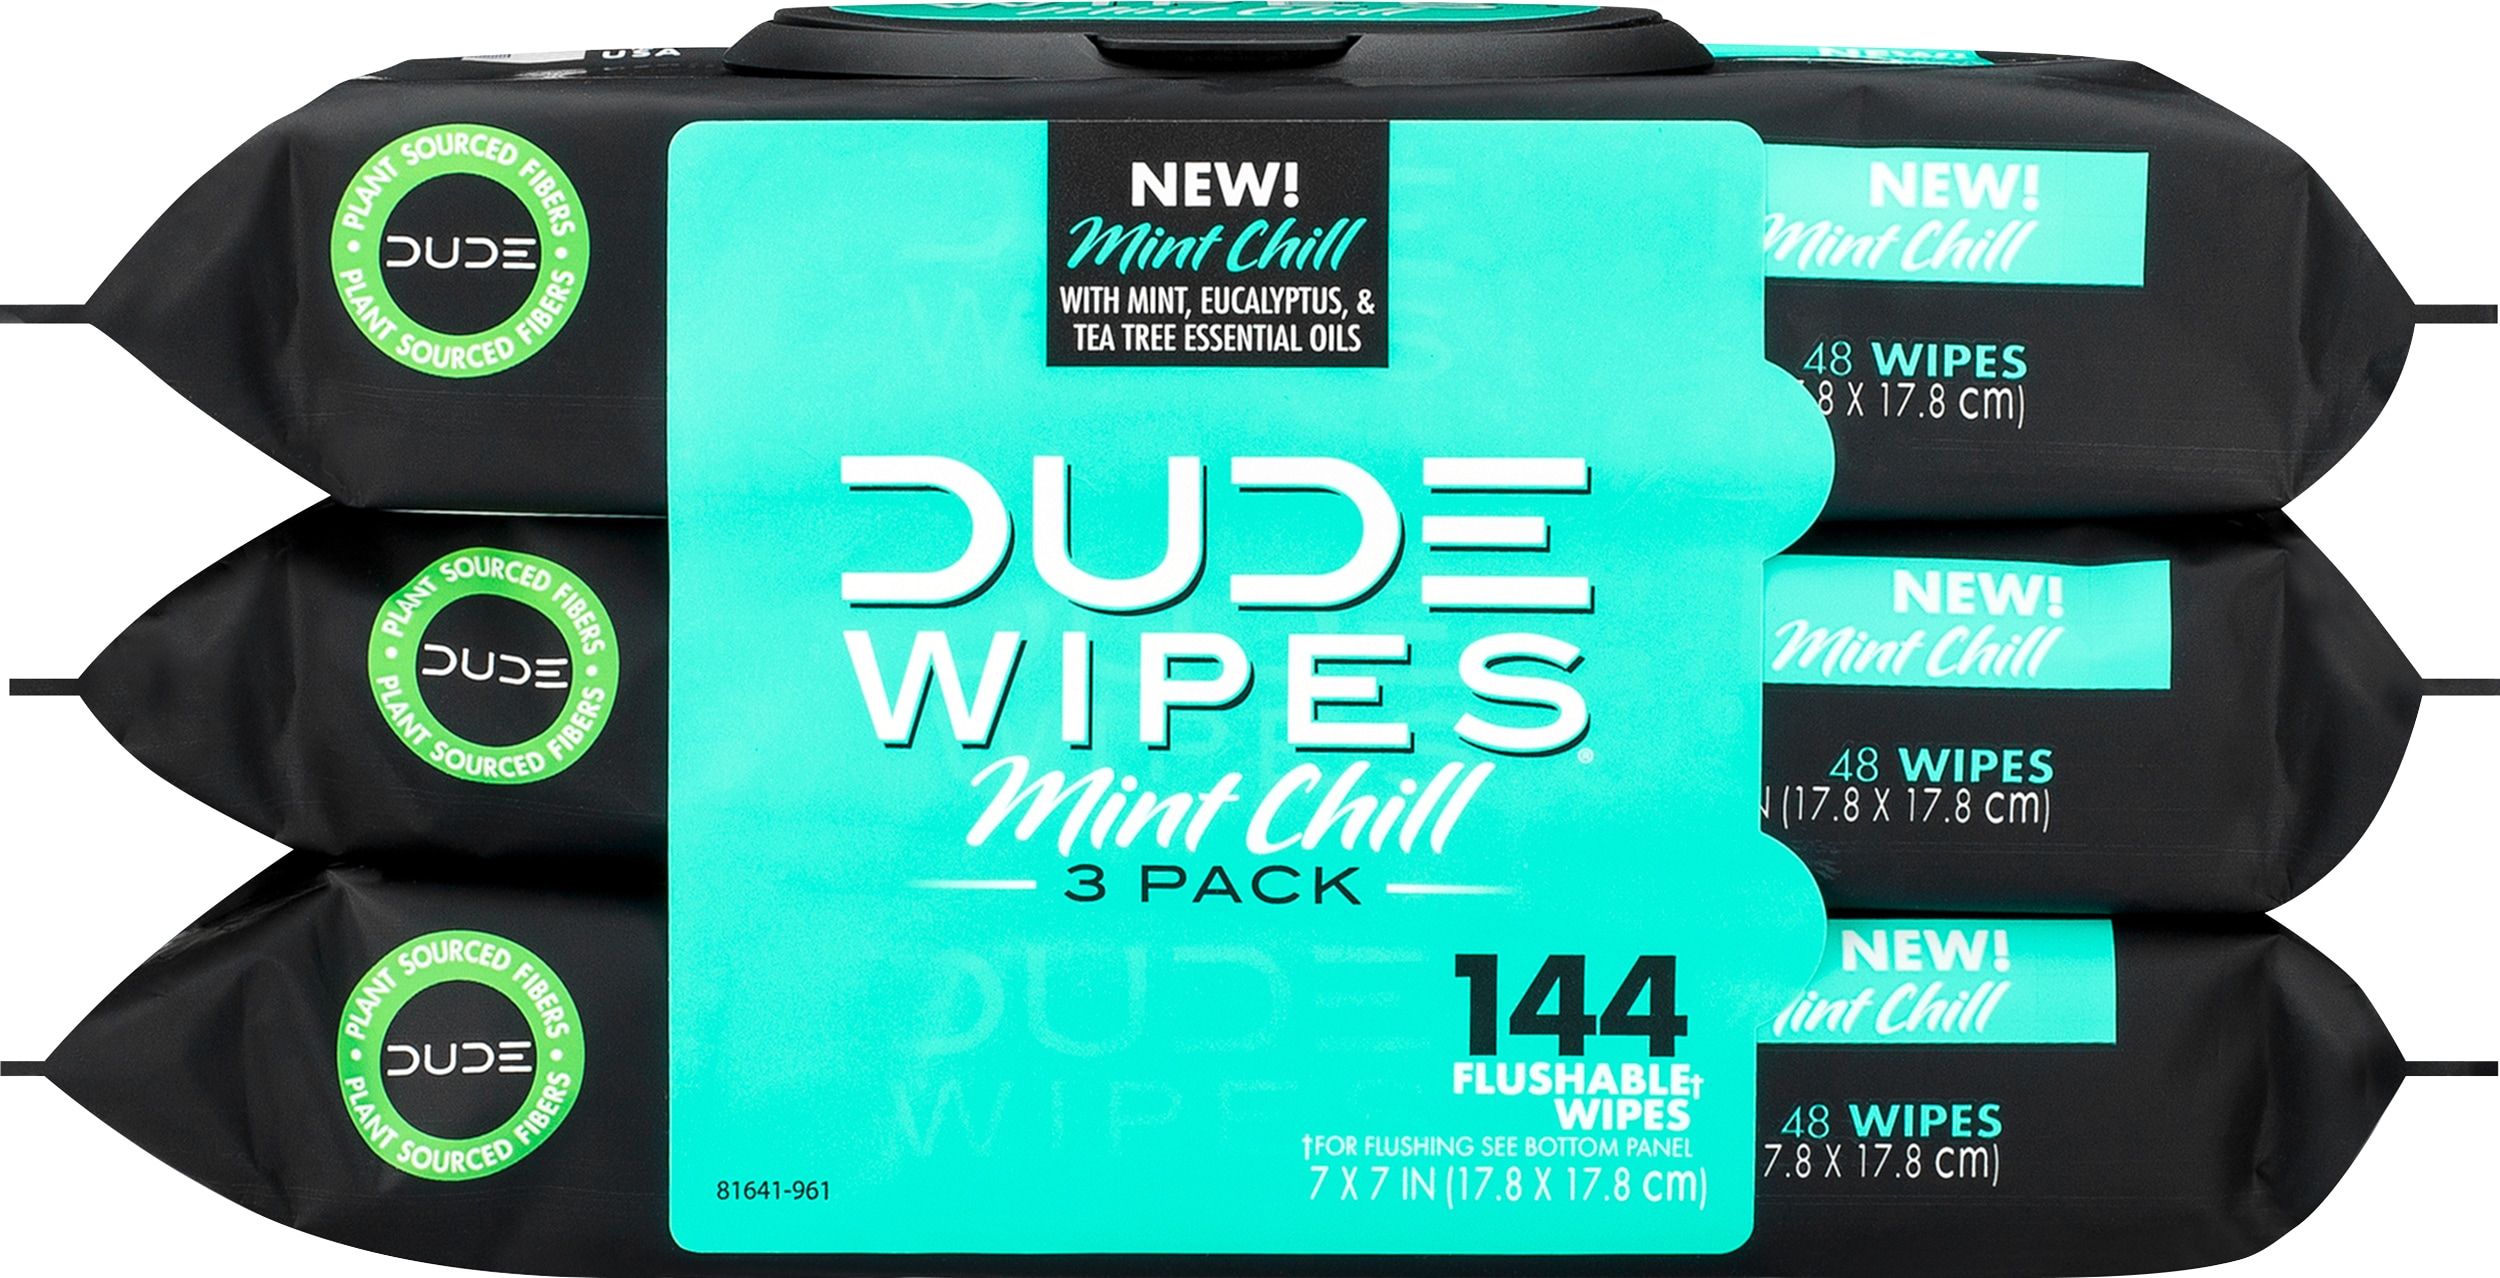  DUDE Wipes - On-The-Go Flushable Wipes - 30 Wipes